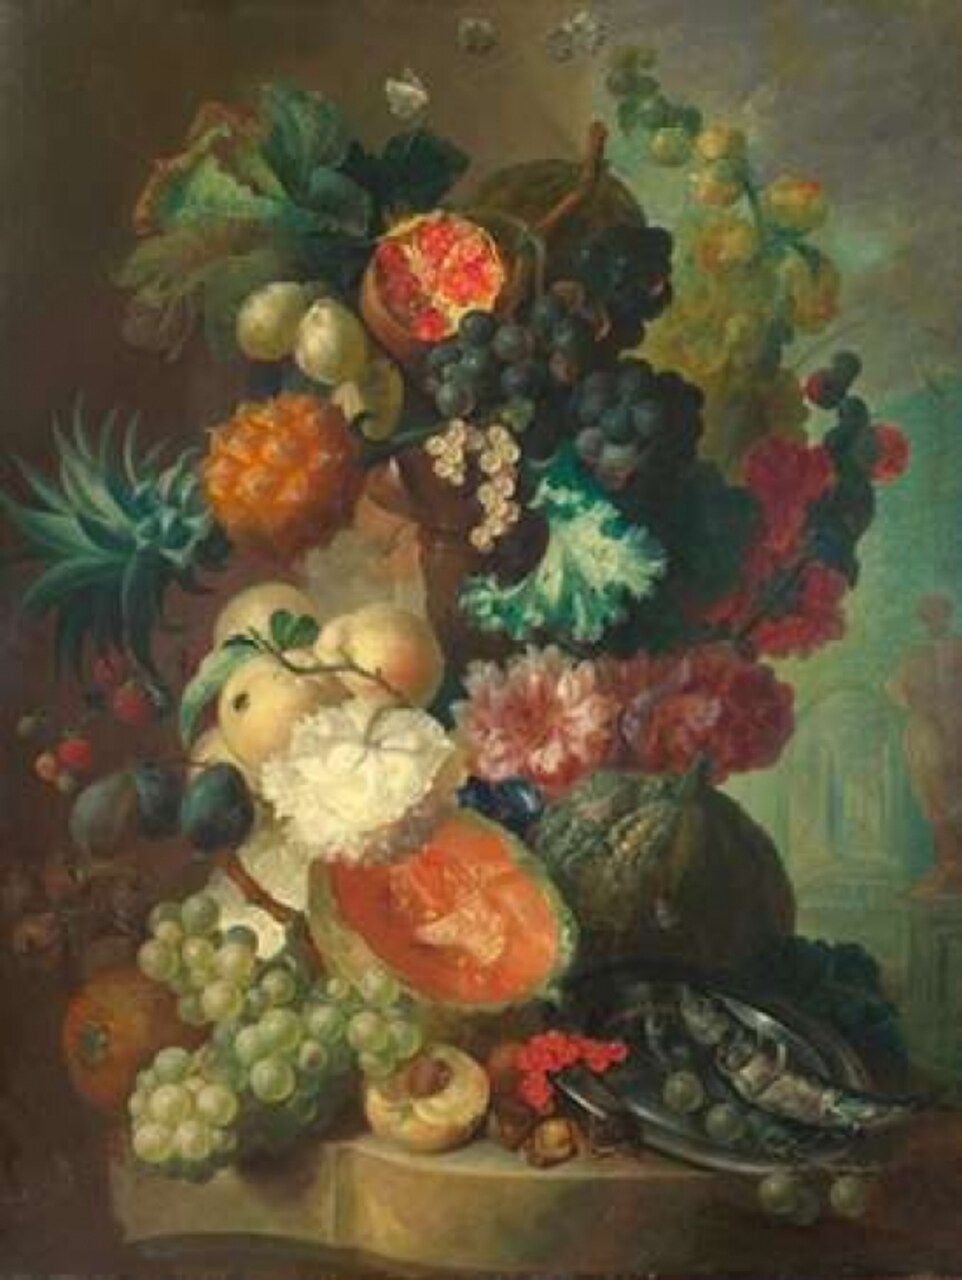 Fruit, flowers and a fish Poster Print by Jan Van Os - Item # VARPDX3AA2729